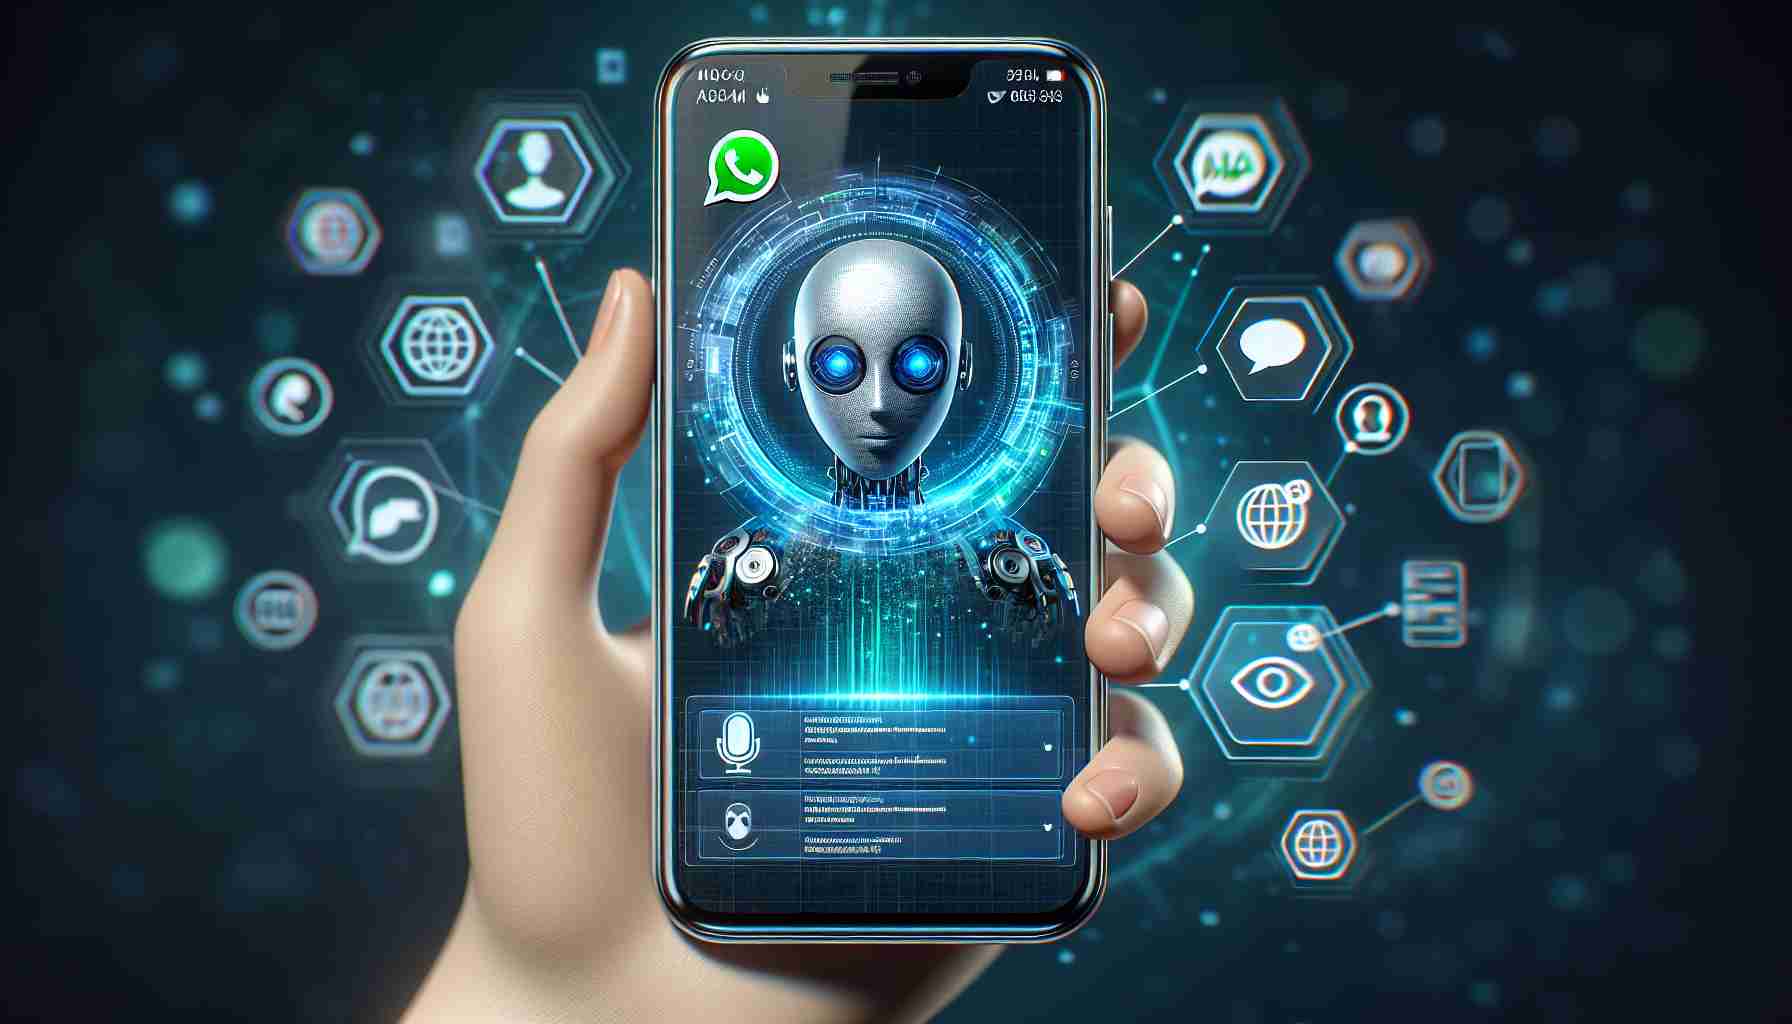 WhatsApp Welcomes New Virtual Assistant Powered by Meta AI